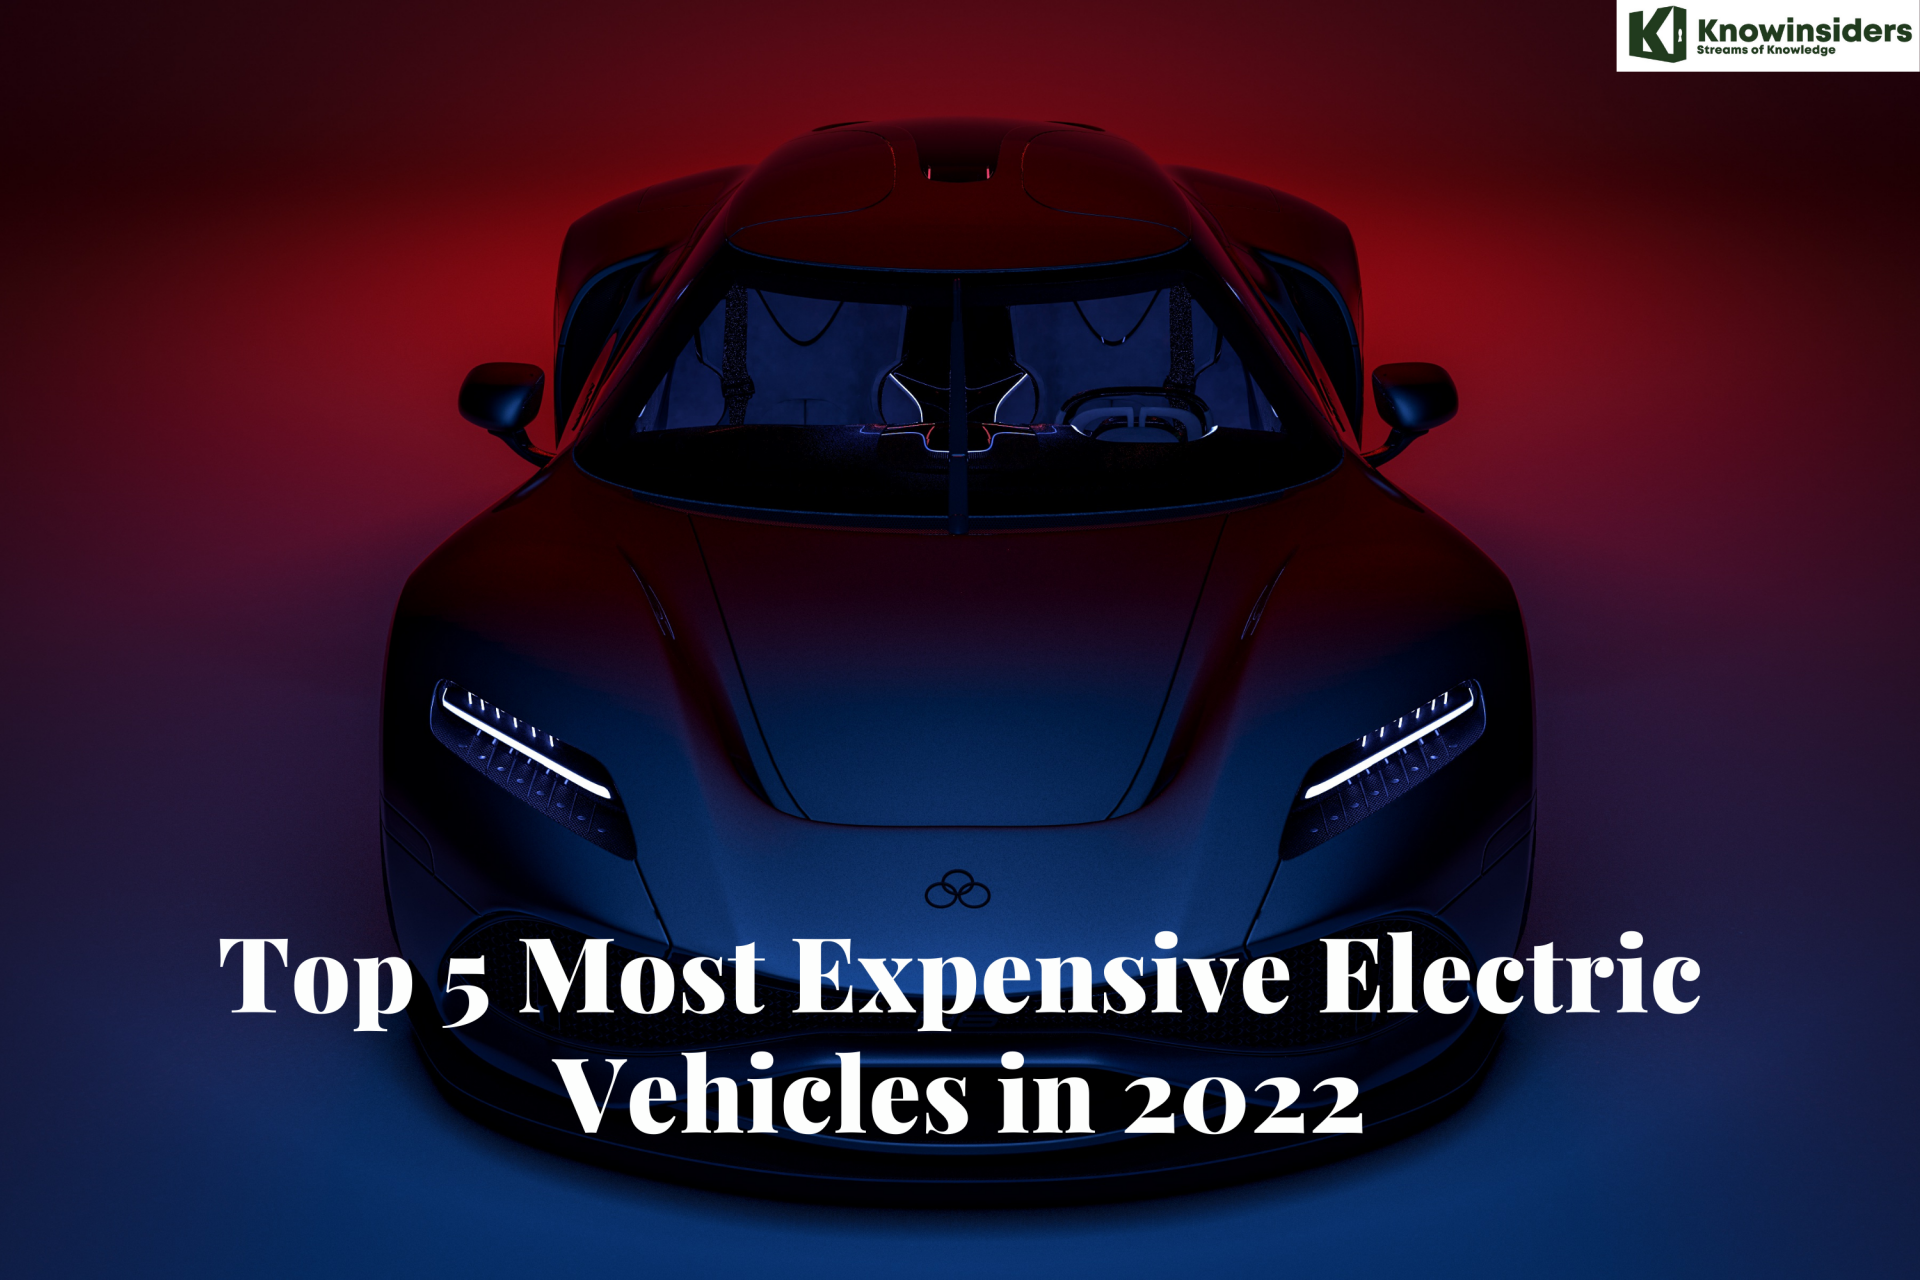 Top 5 Most Expensive Electric Vehicles in 2022